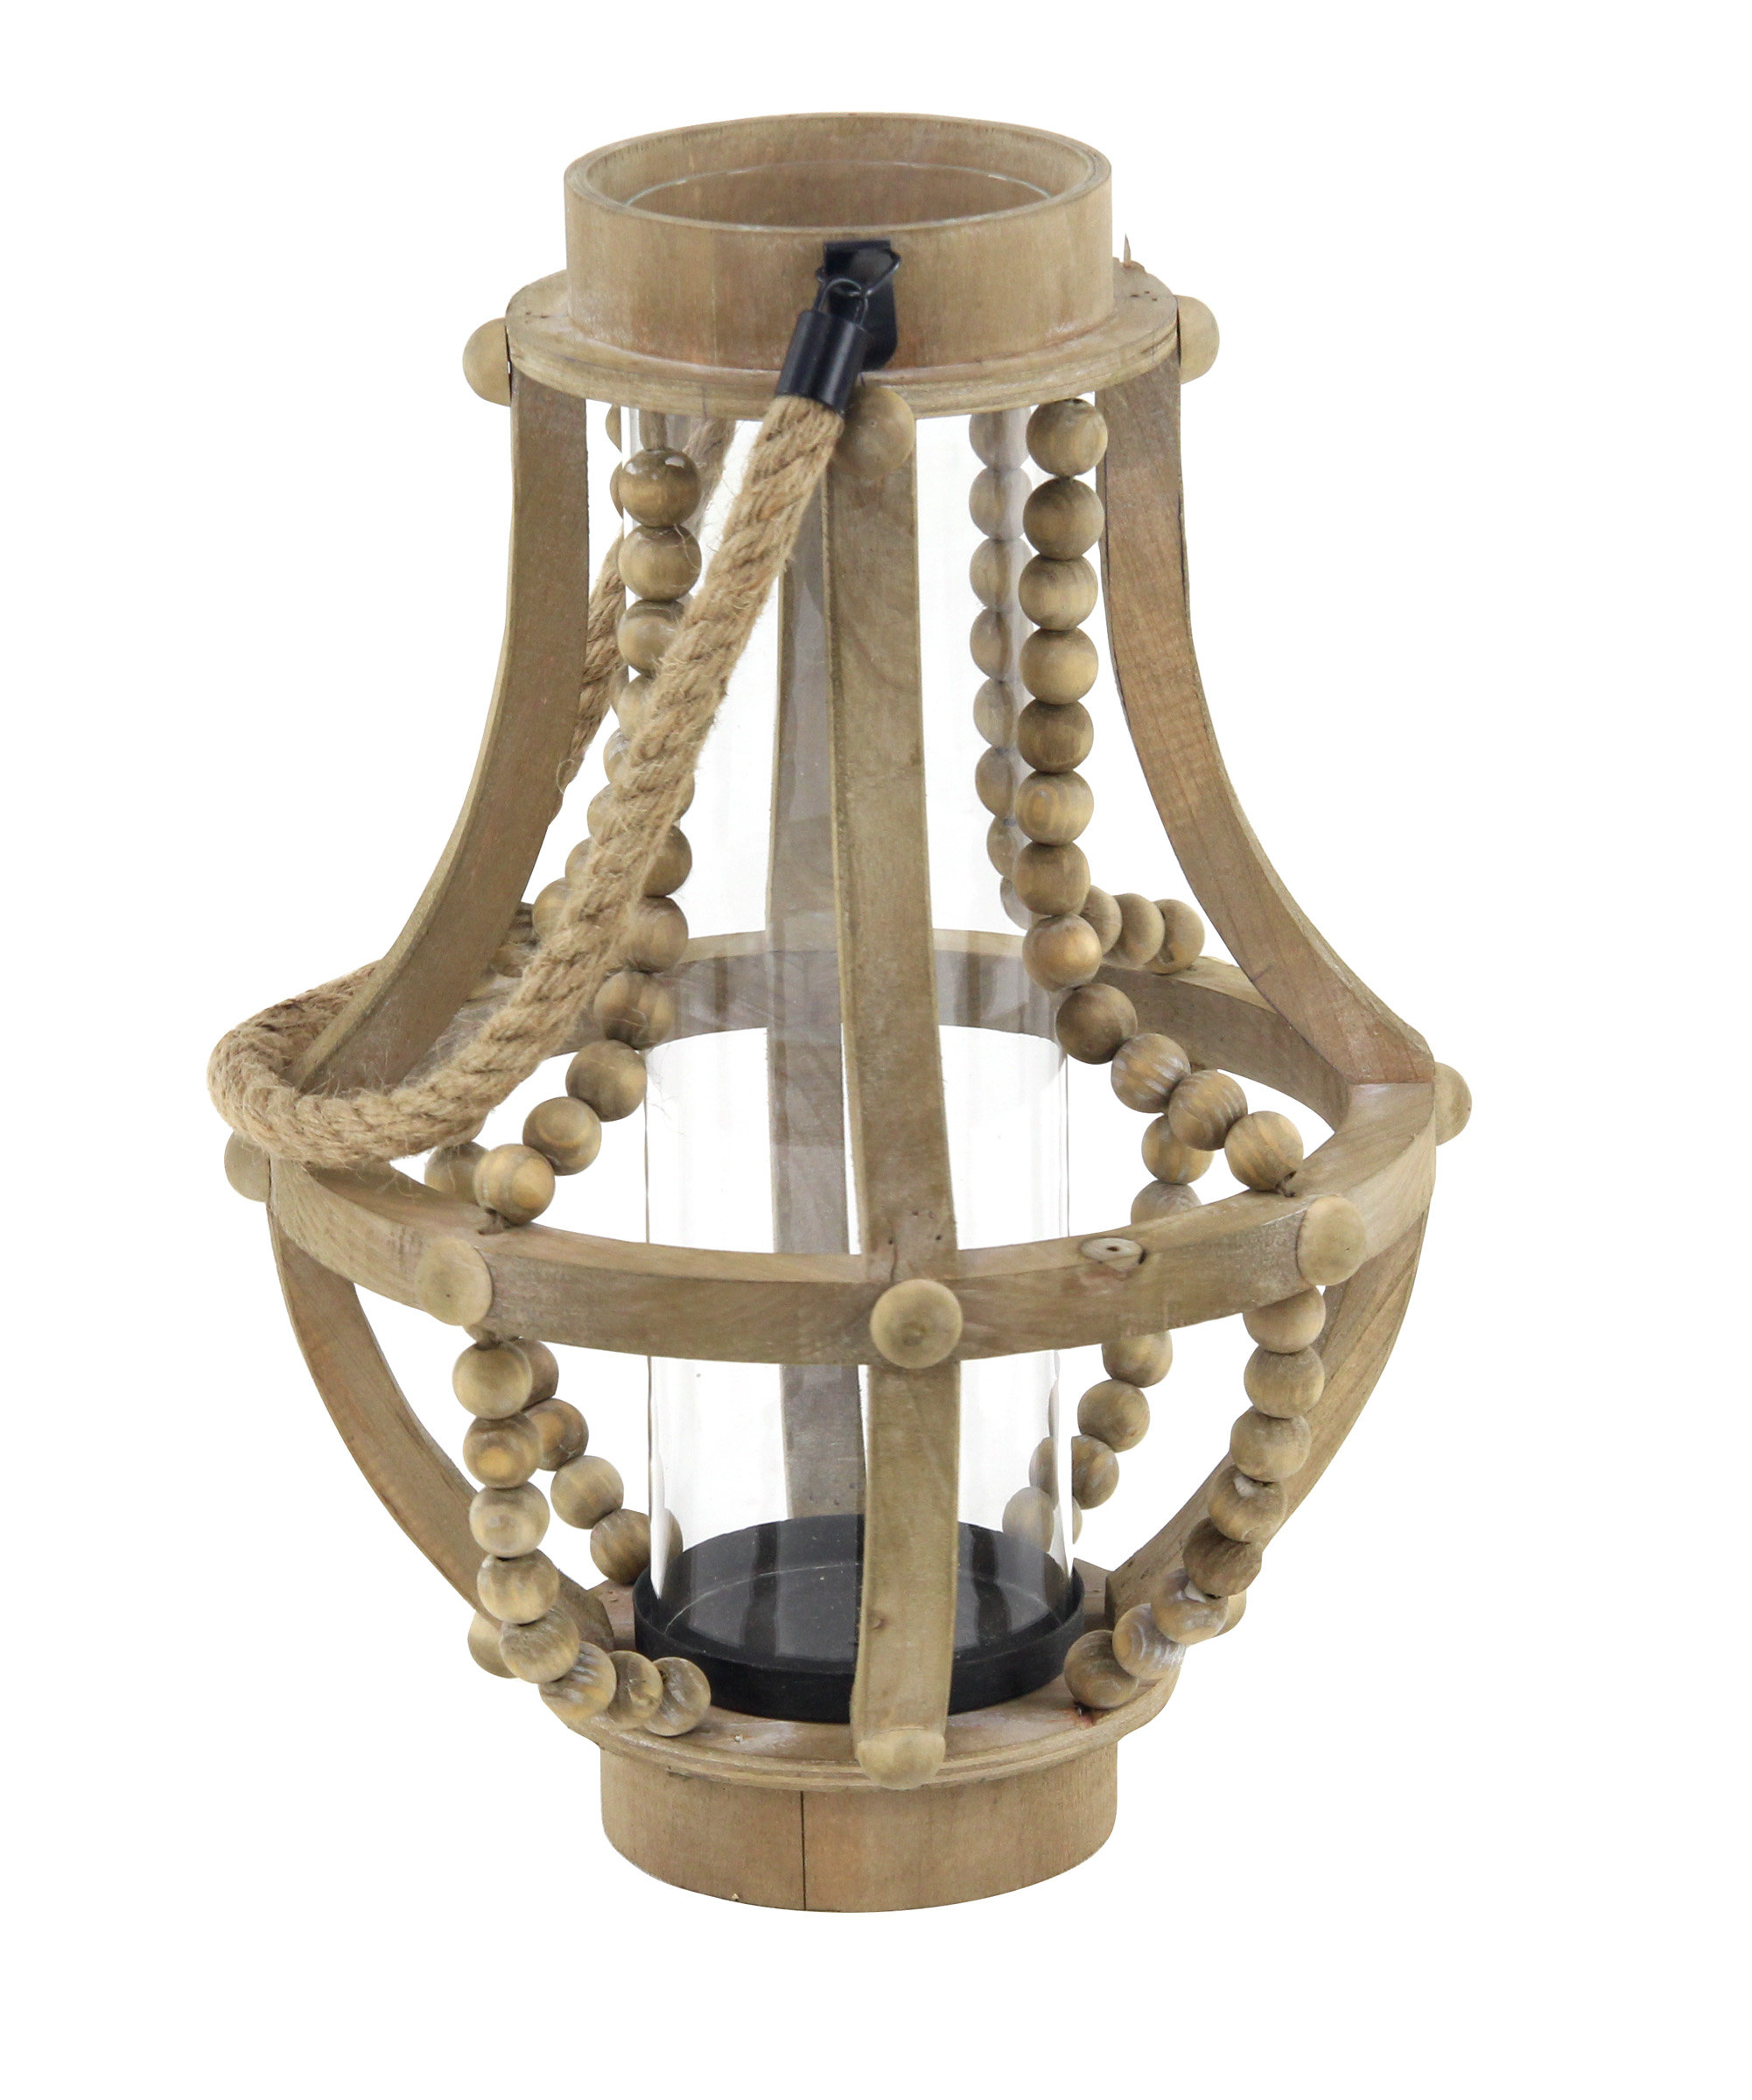 Details about   StyleWell Natural Mango Wood Candle Hanging or Tabletop Lantern with Rope Handle 